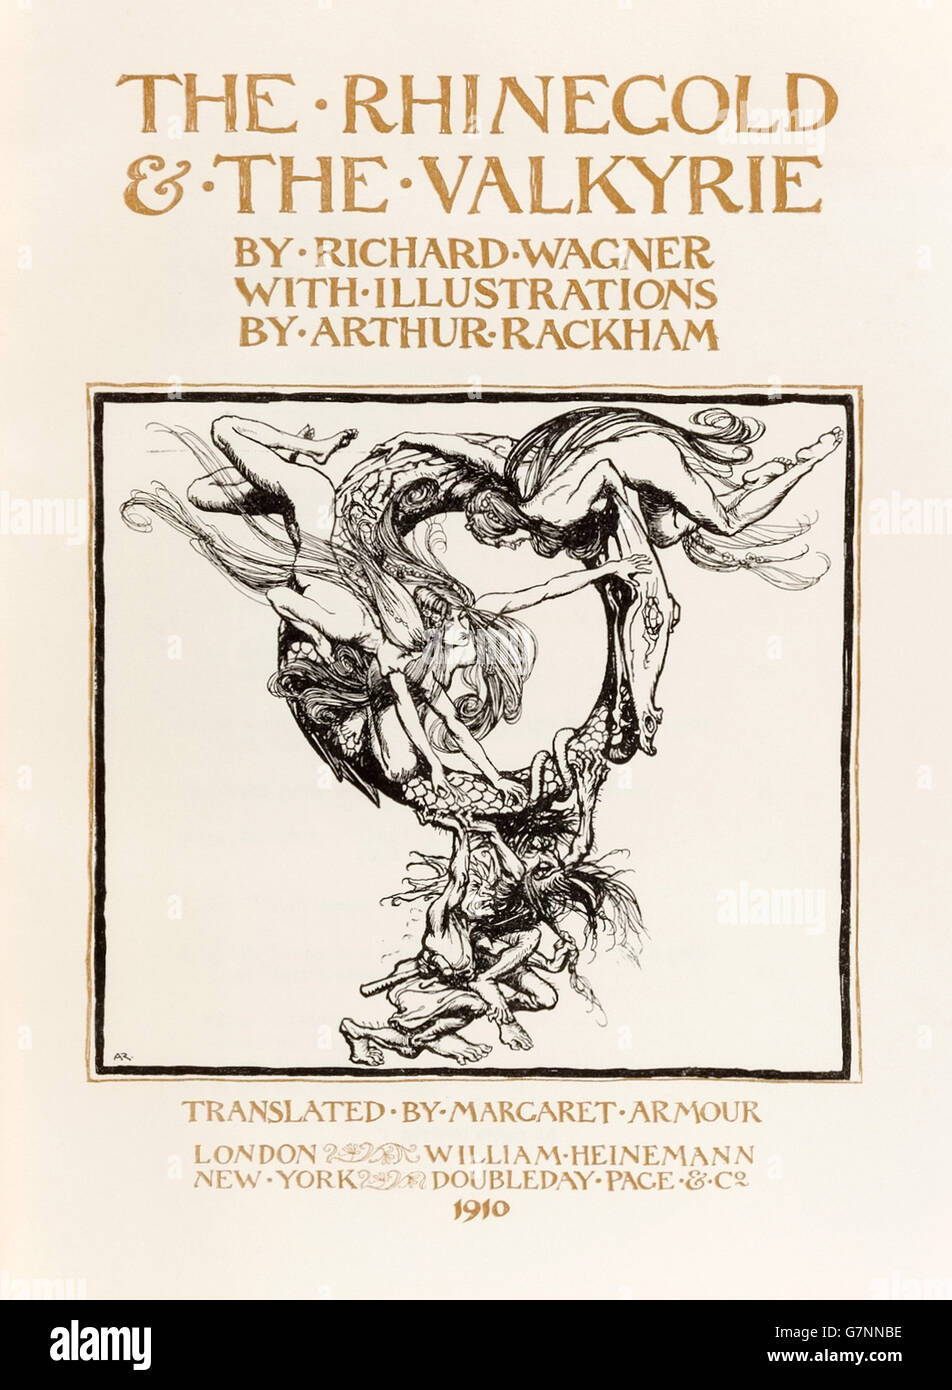 Title page from ‘The Rhinegold & the Valkyrie’ illustrated by Arthur Rackham (1867-1939), first edition published in 1910. Stock Photo